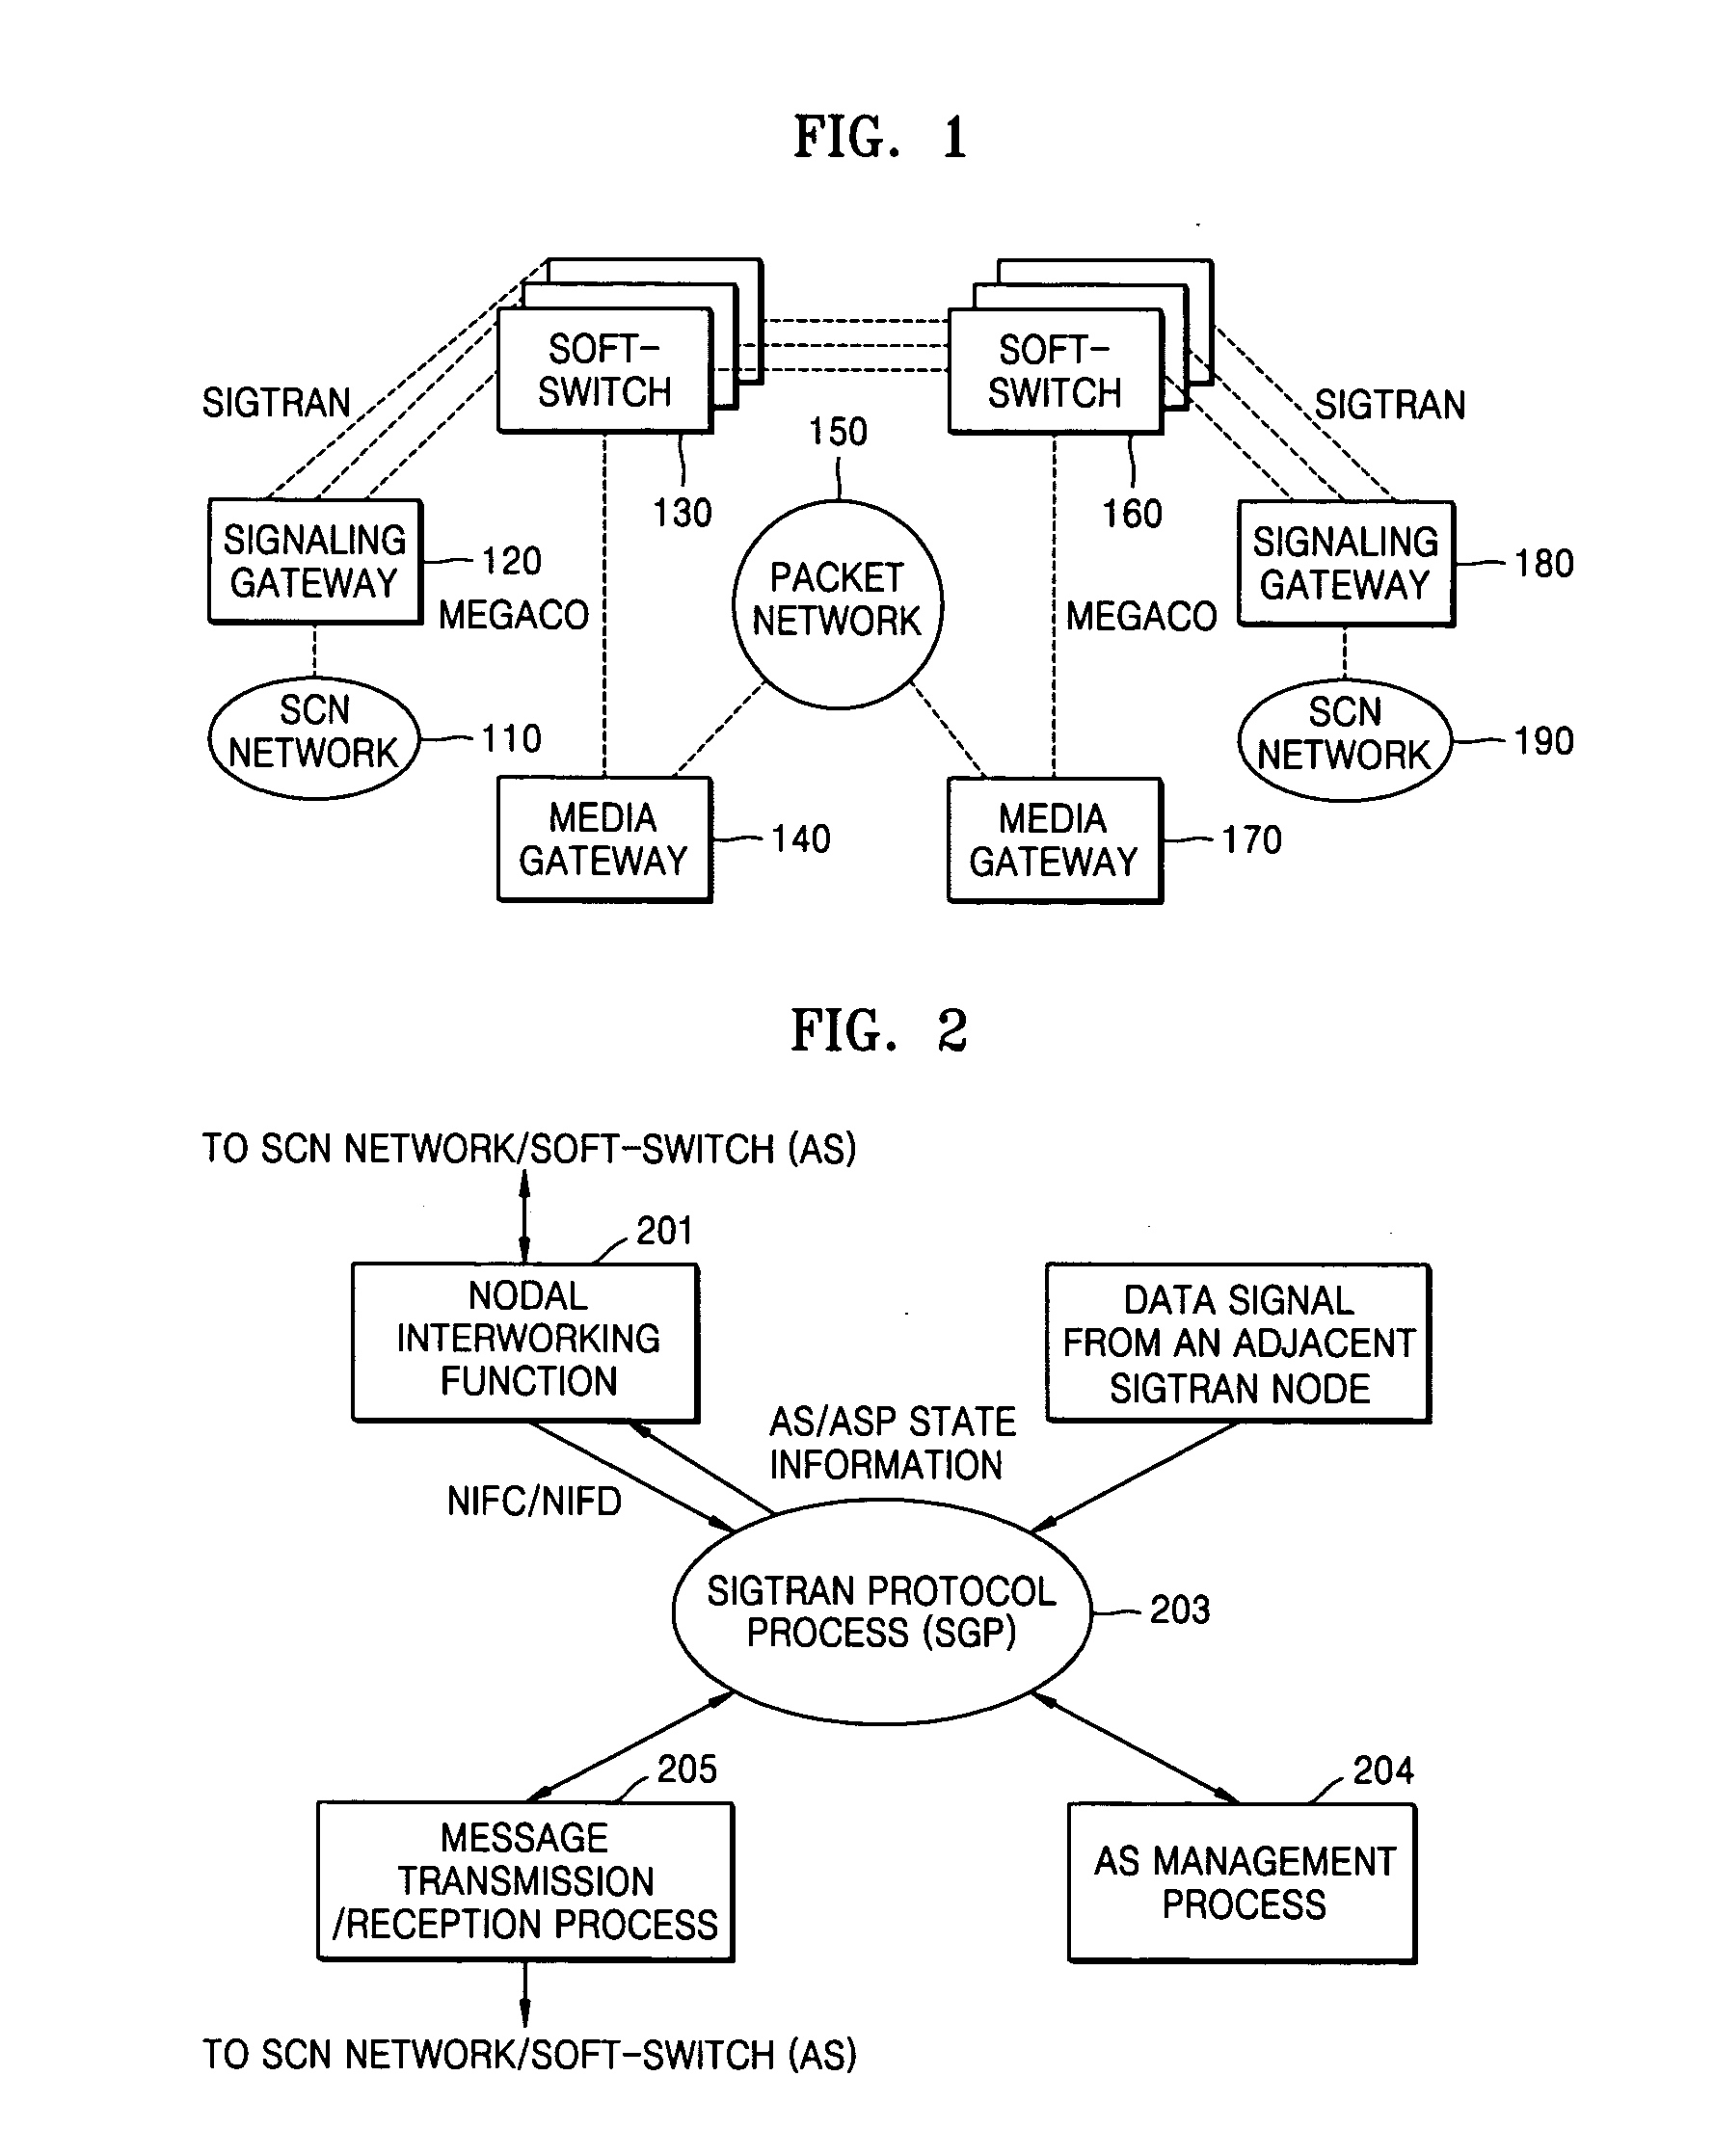 System and method for performing traffic process in integrated network of voice-over internet protocol network and public switched telephone network